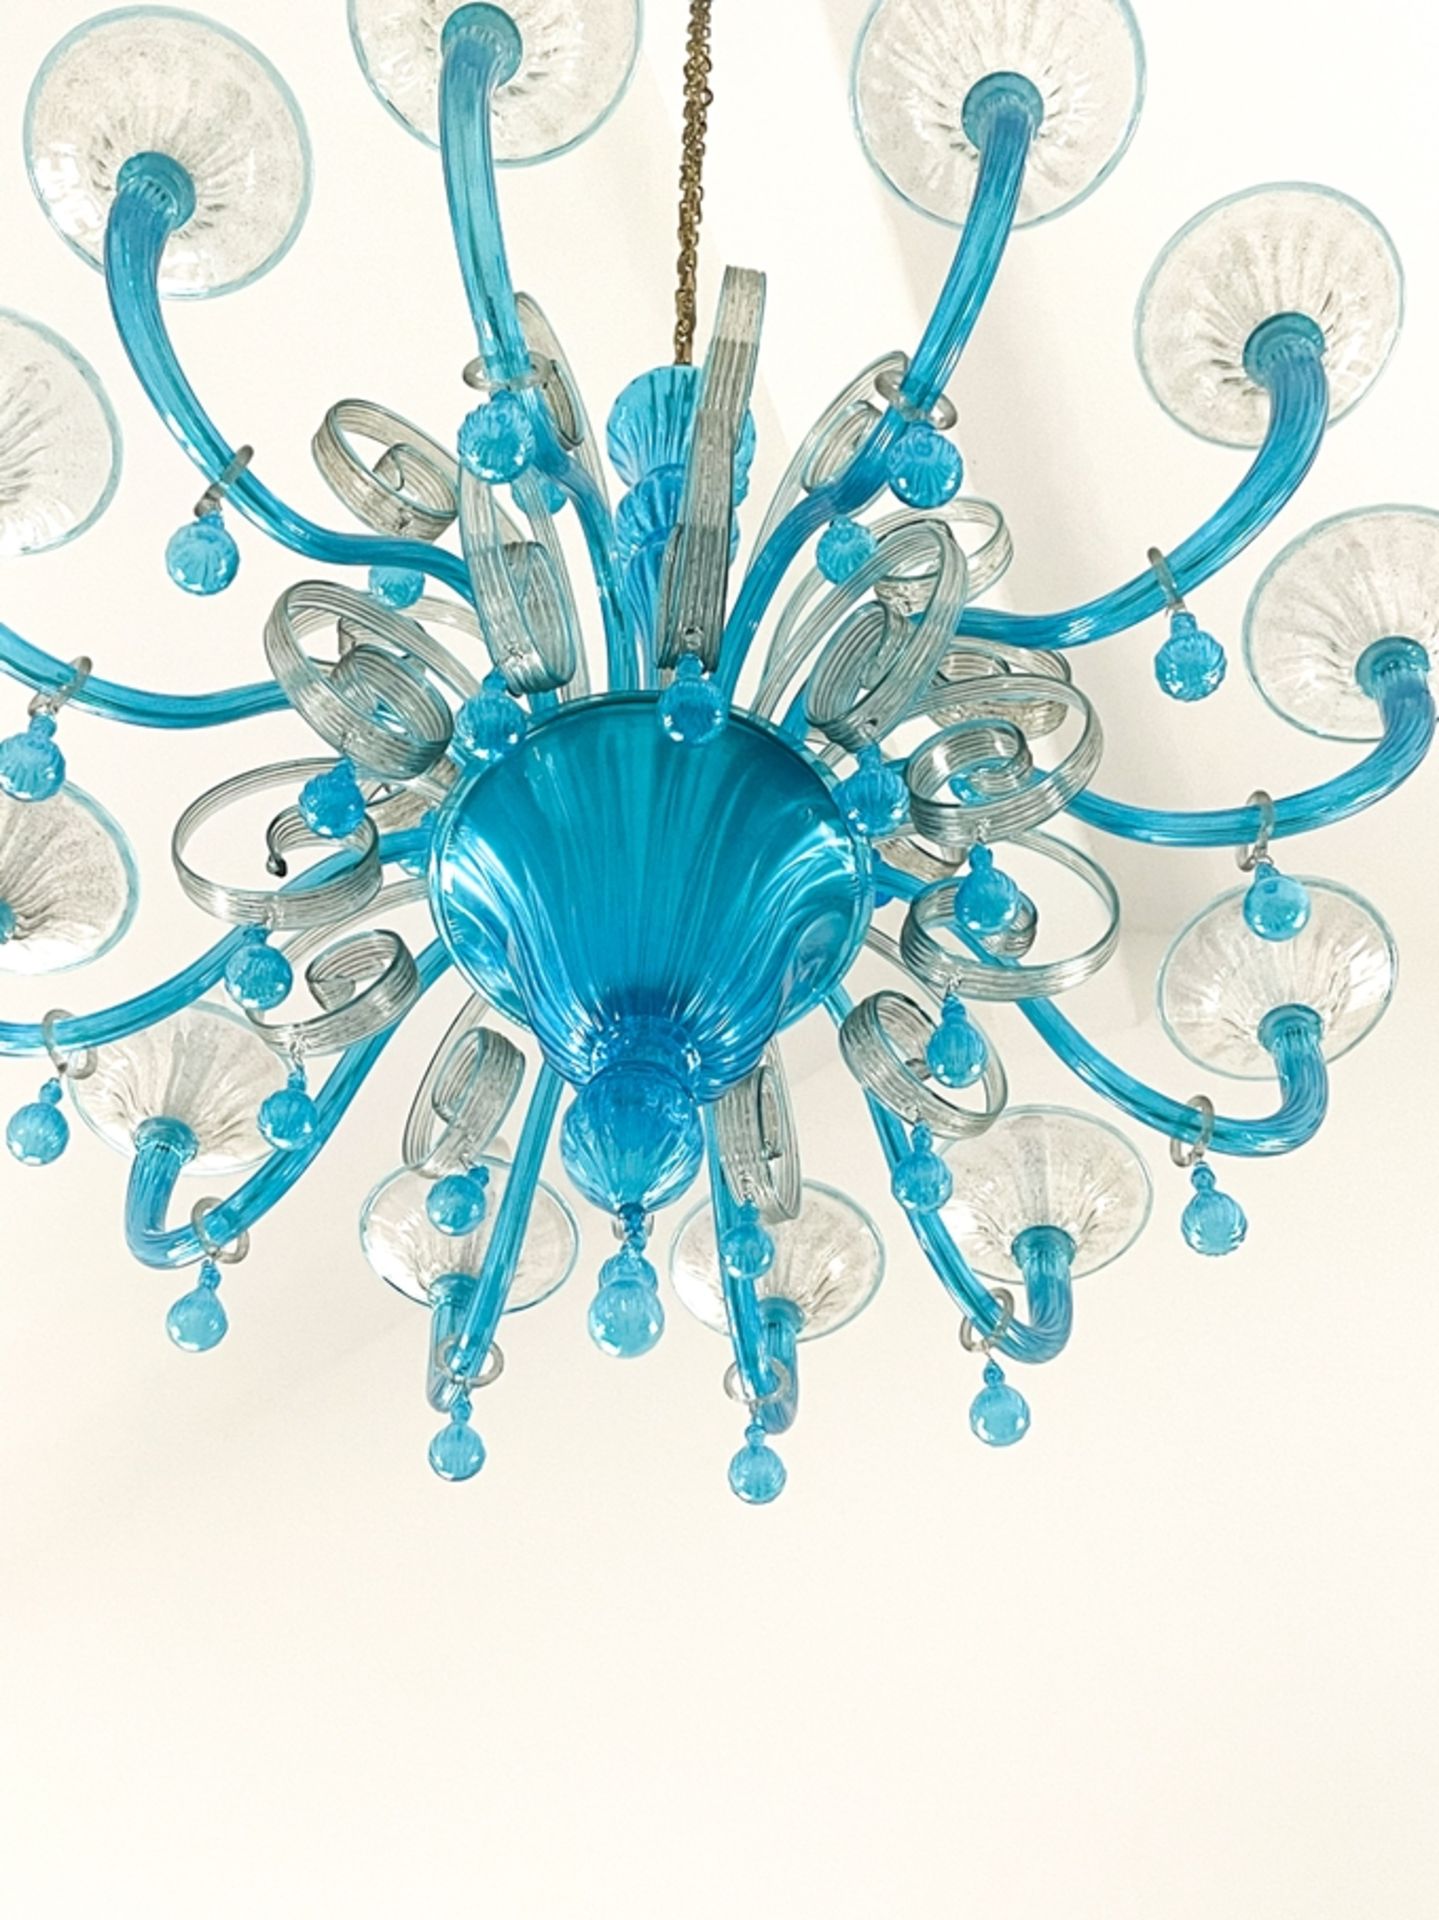 Monumental blur Murano chandelier / 1 of 2, - Image 4 of 5